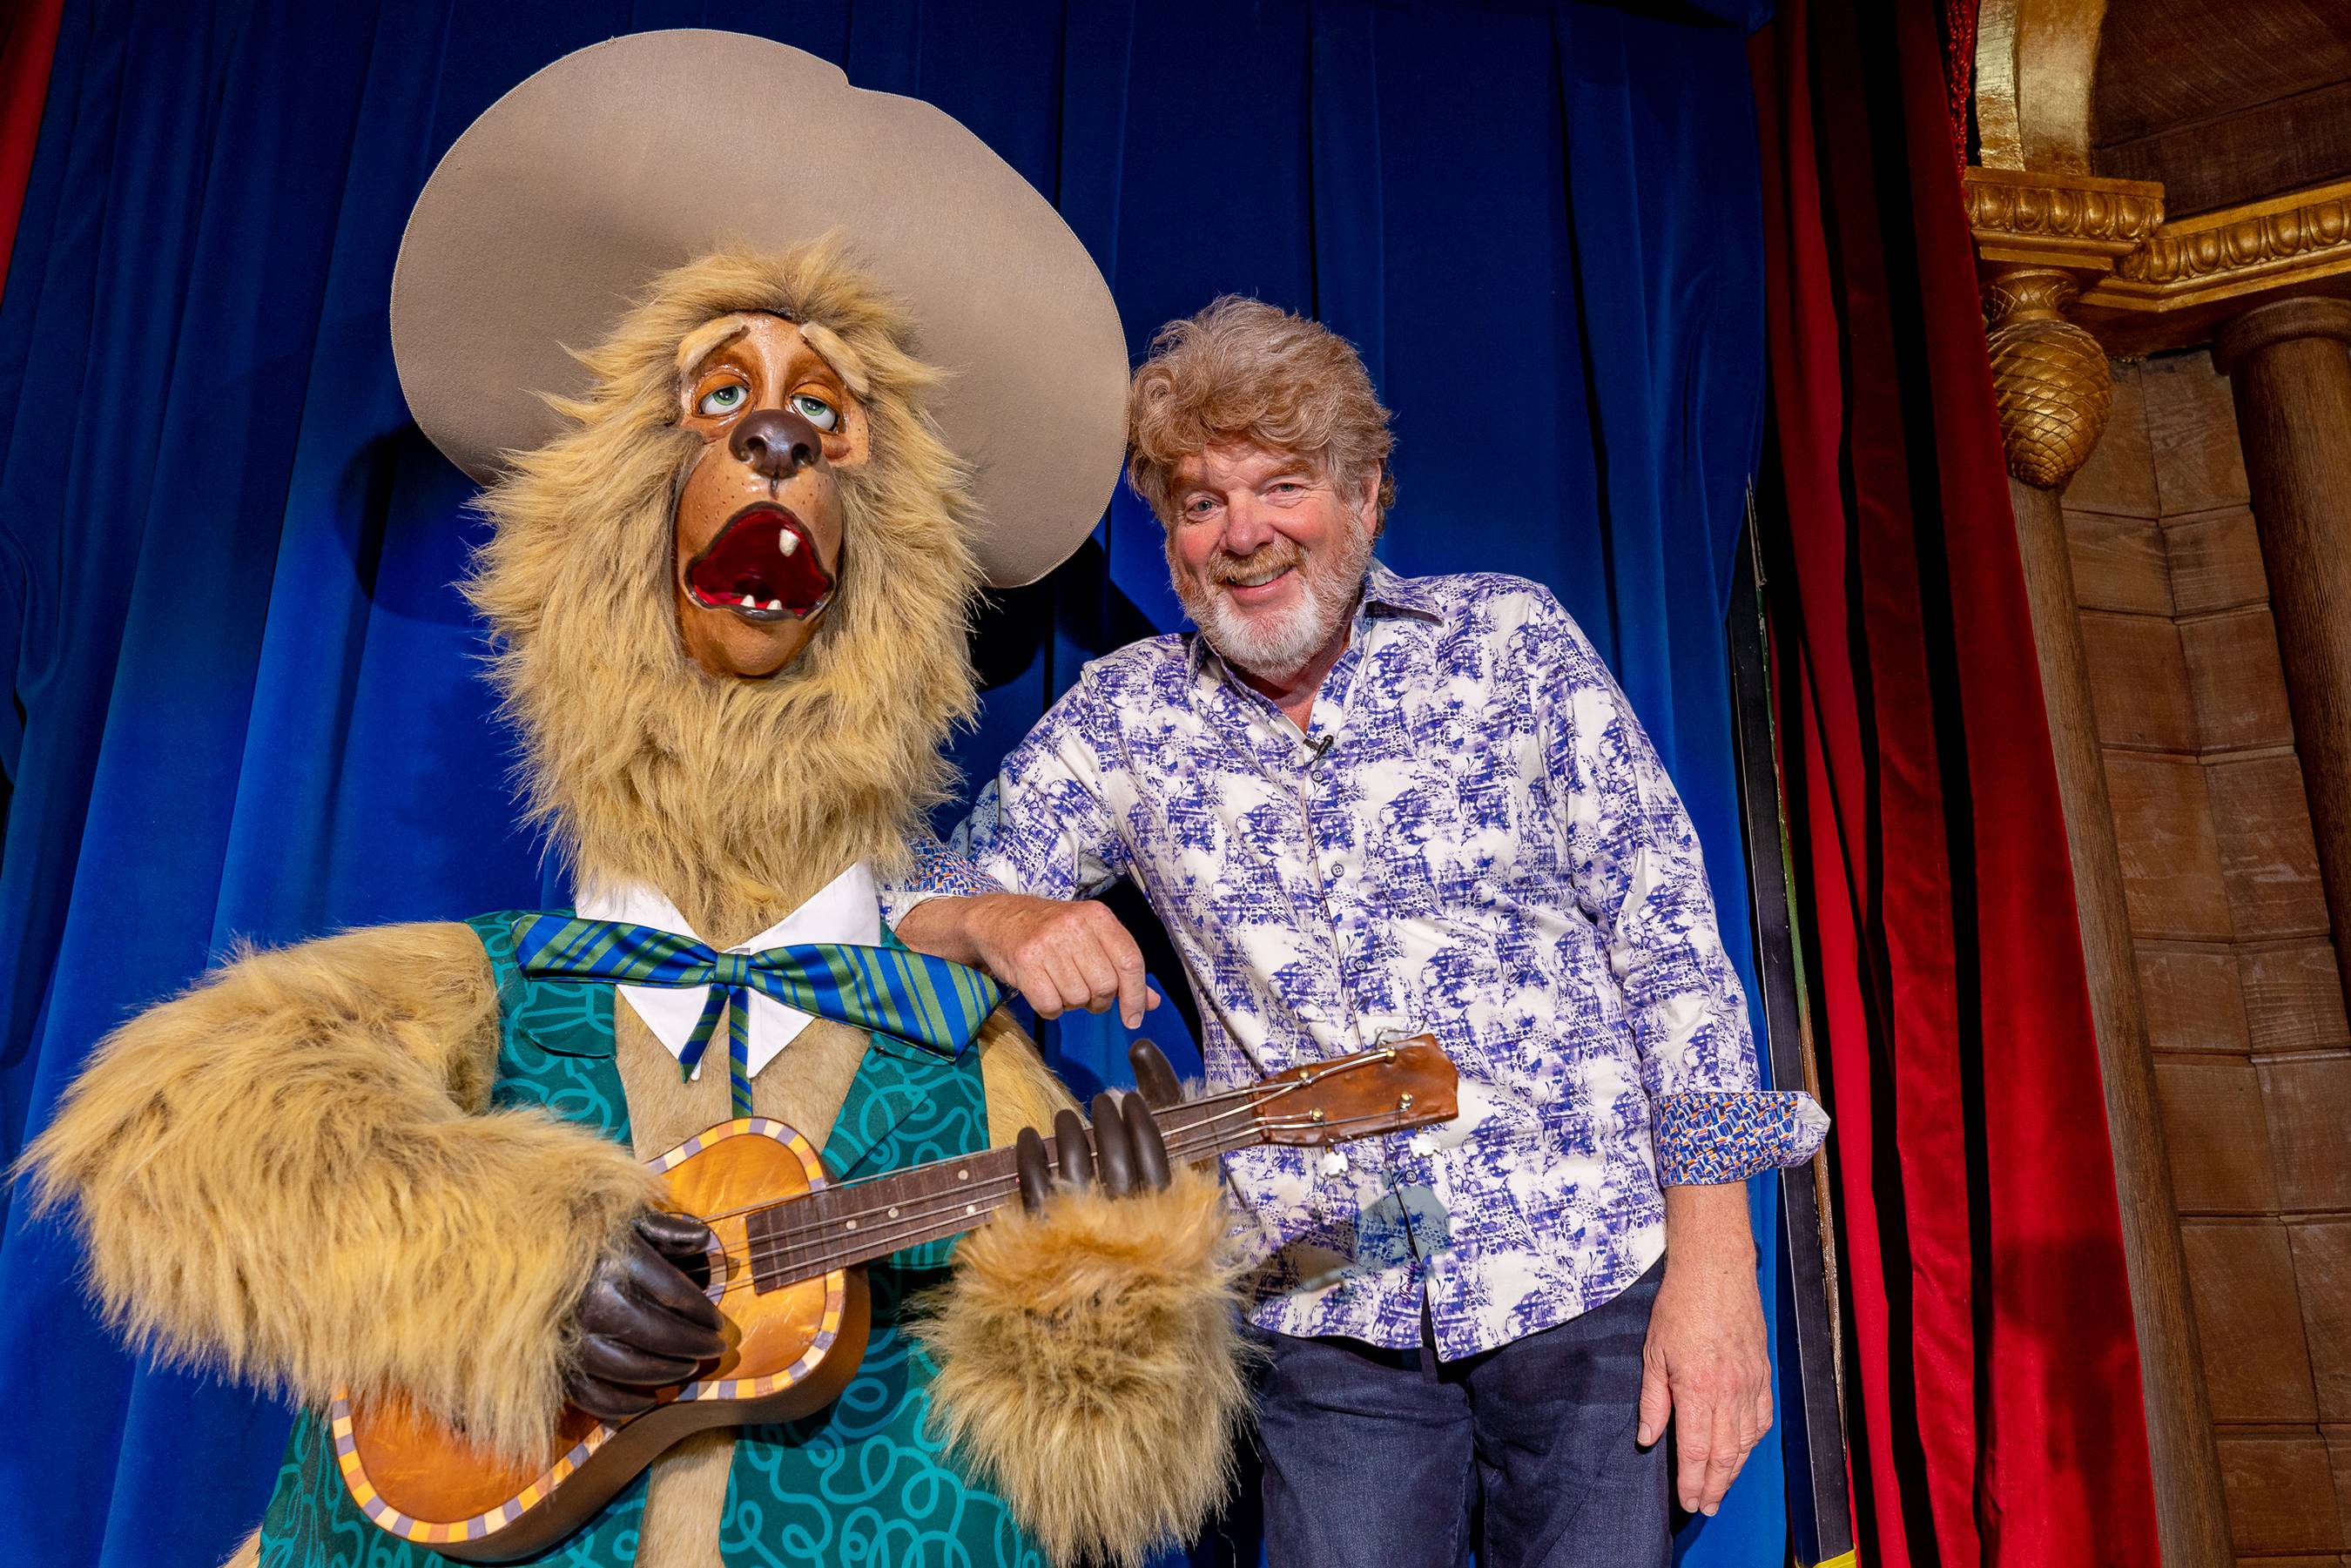 Disney's Country Bear Musical Jamboree Soundtrack Now Available on Streaming Services